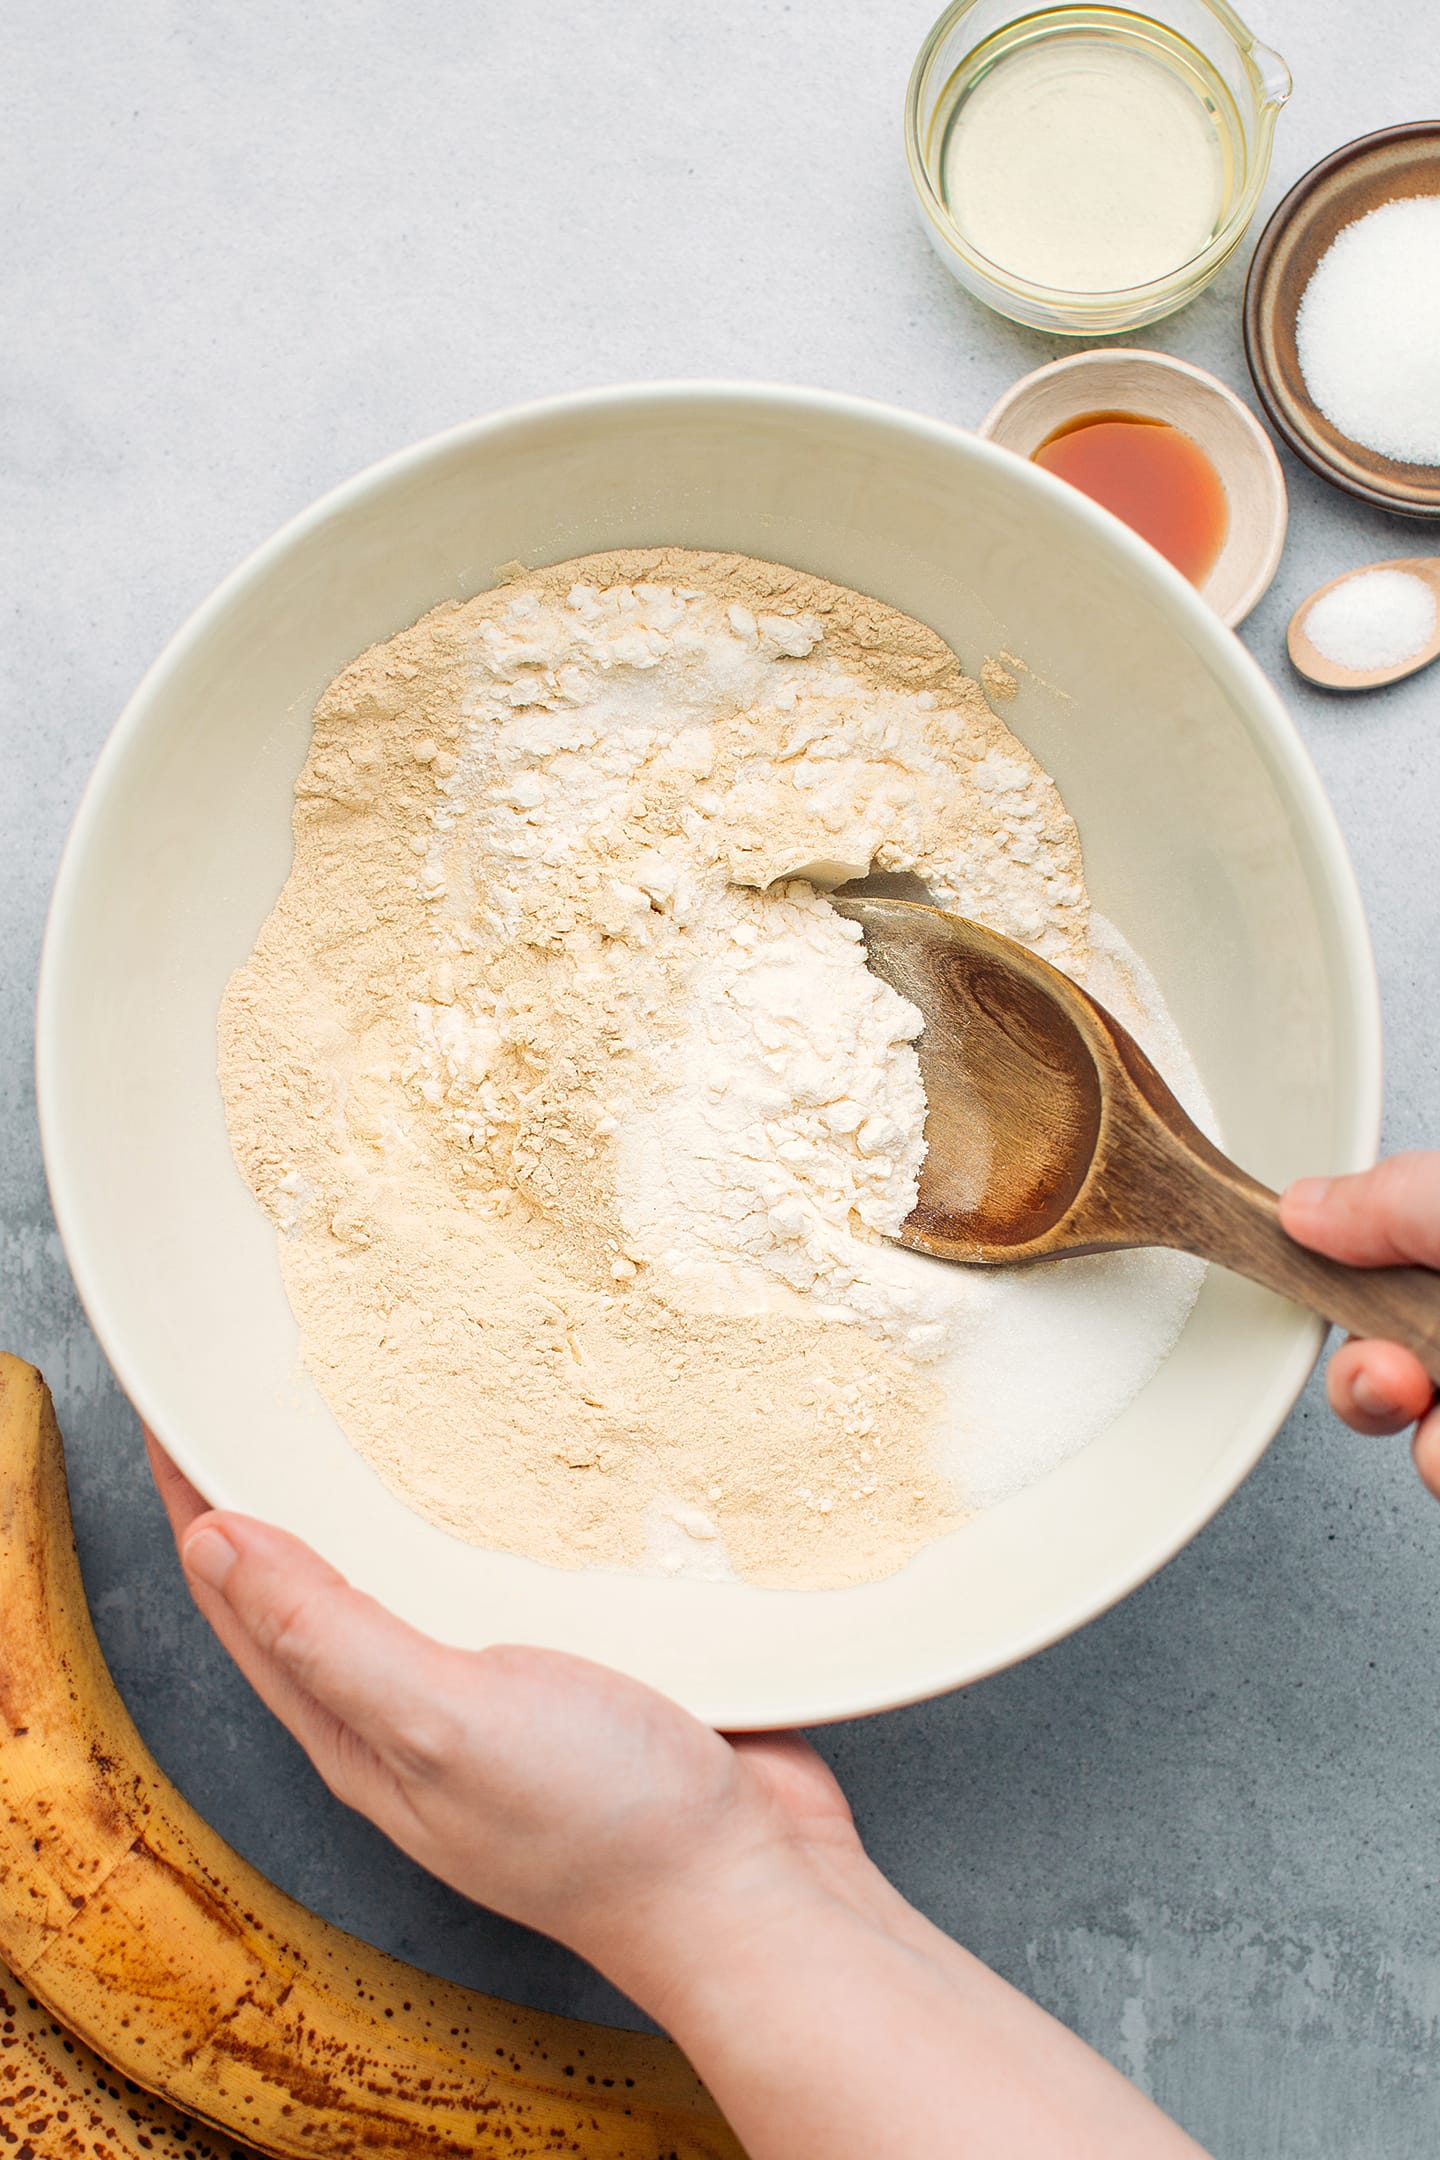 Whisking flour with protein powder and sugar.